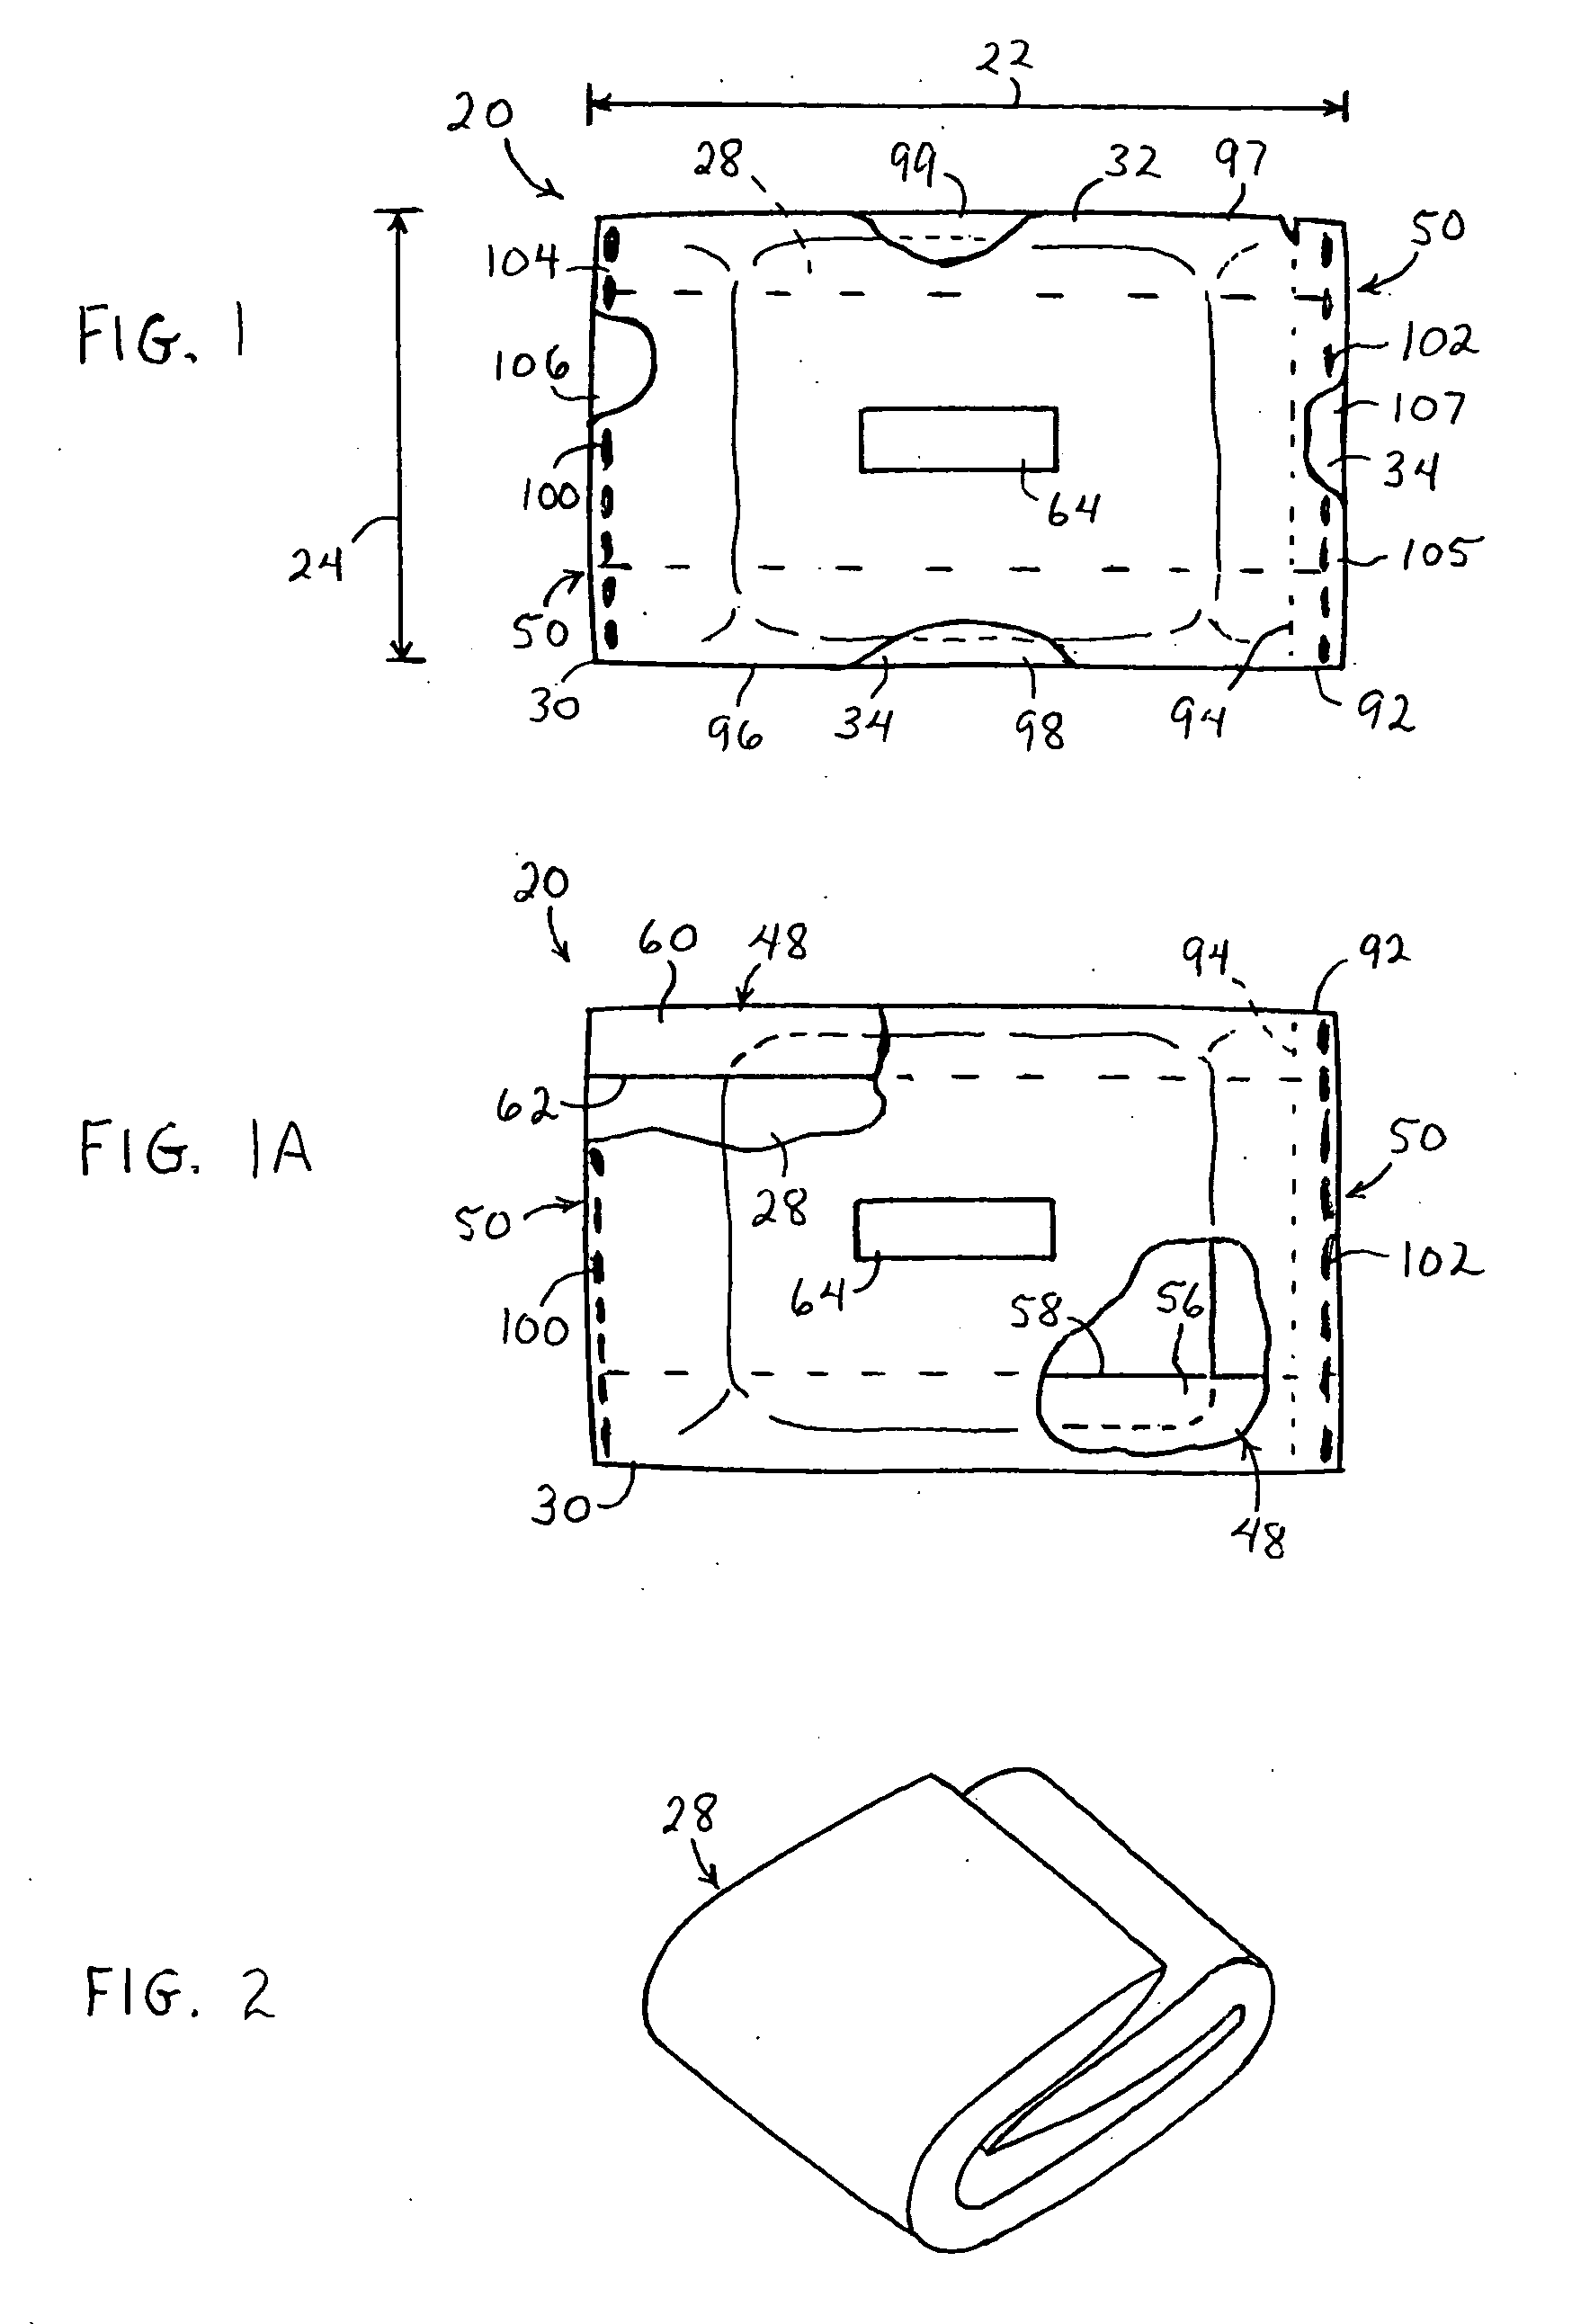 Individual, expandable wrapper for a hygiene product